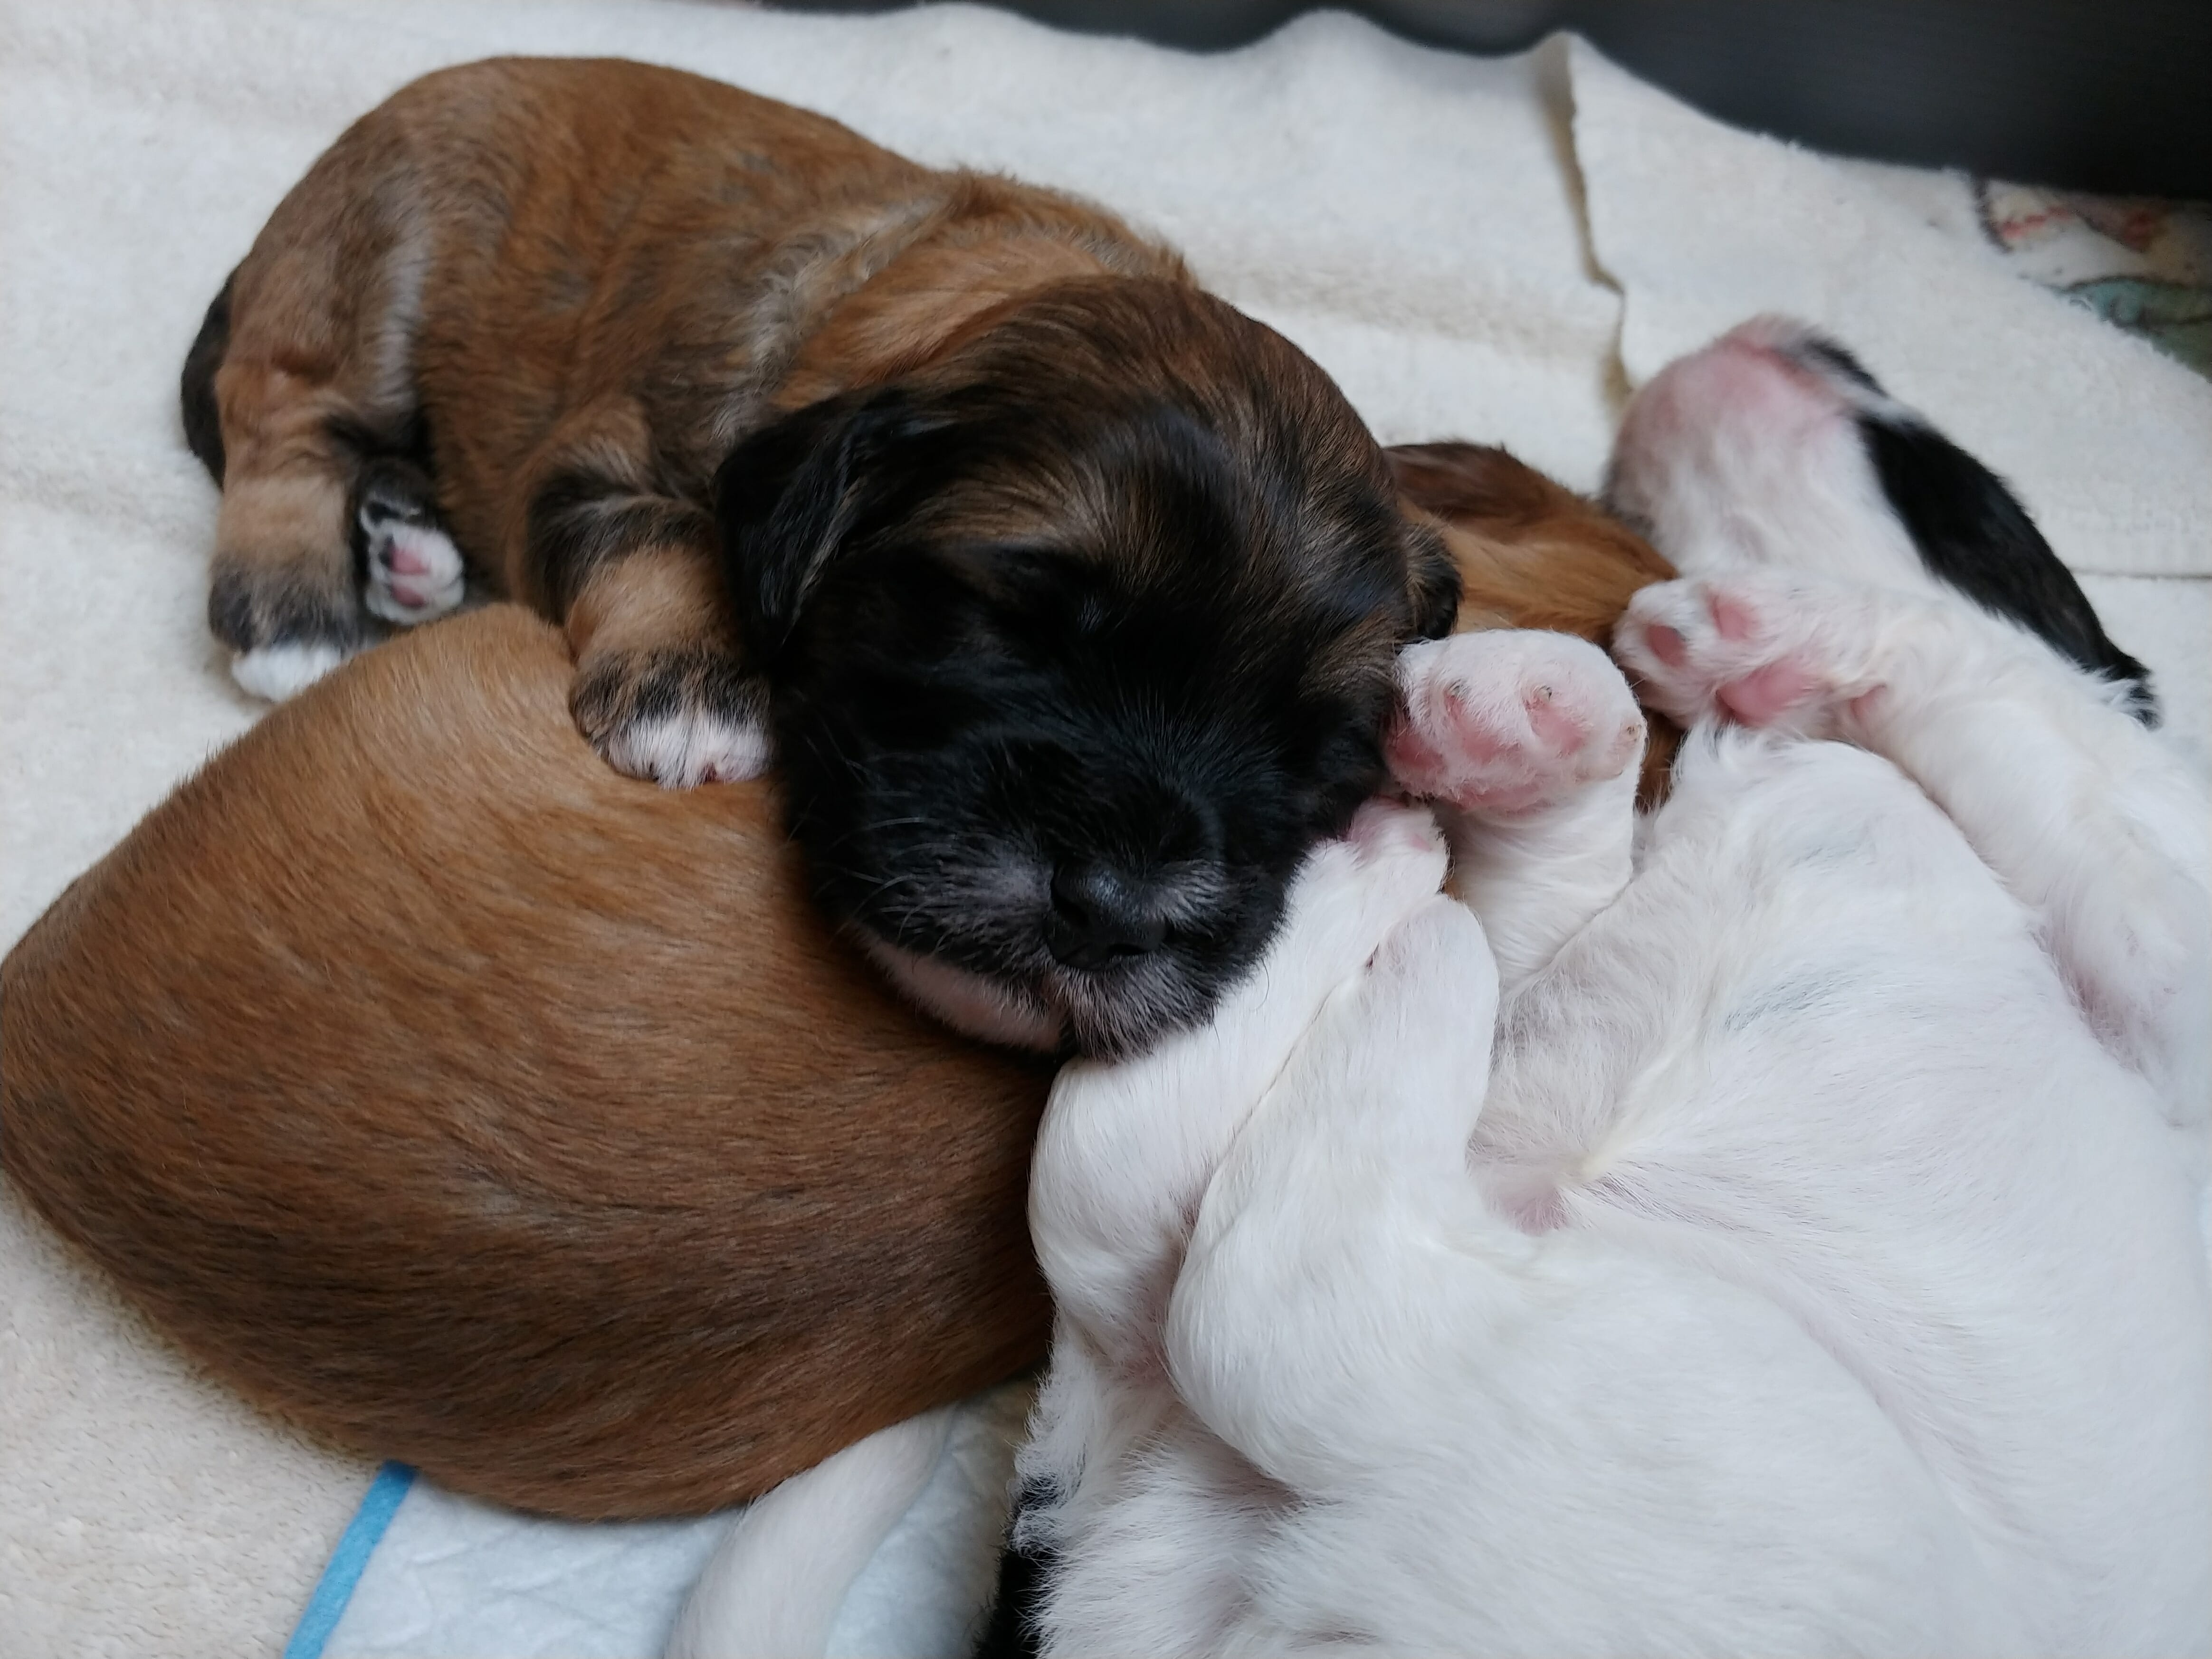 Upside down balck and white puppy sleeping with two brown puppies sleeping on top of each other